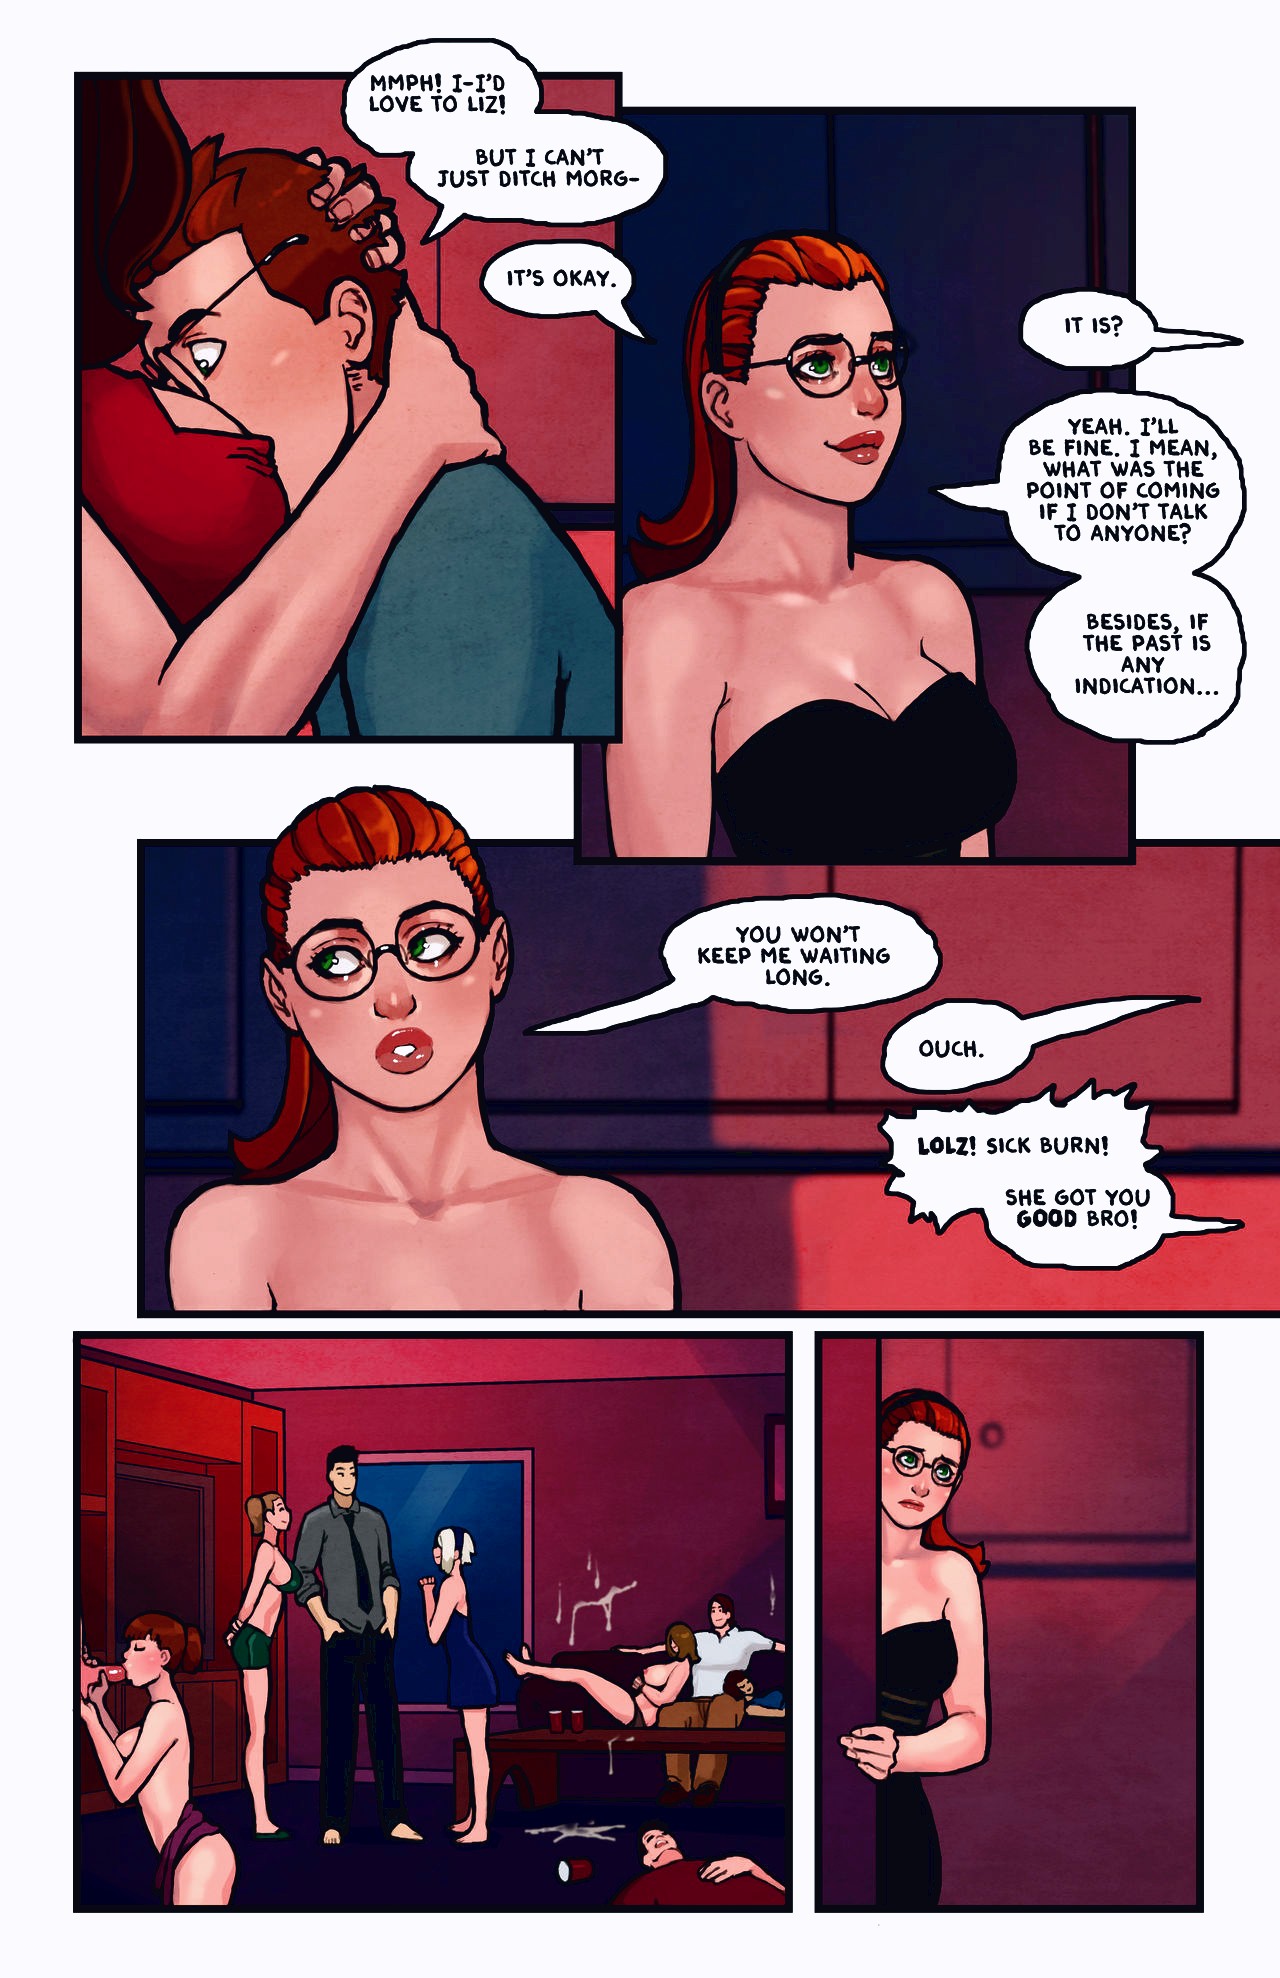 This Romantic World page 070